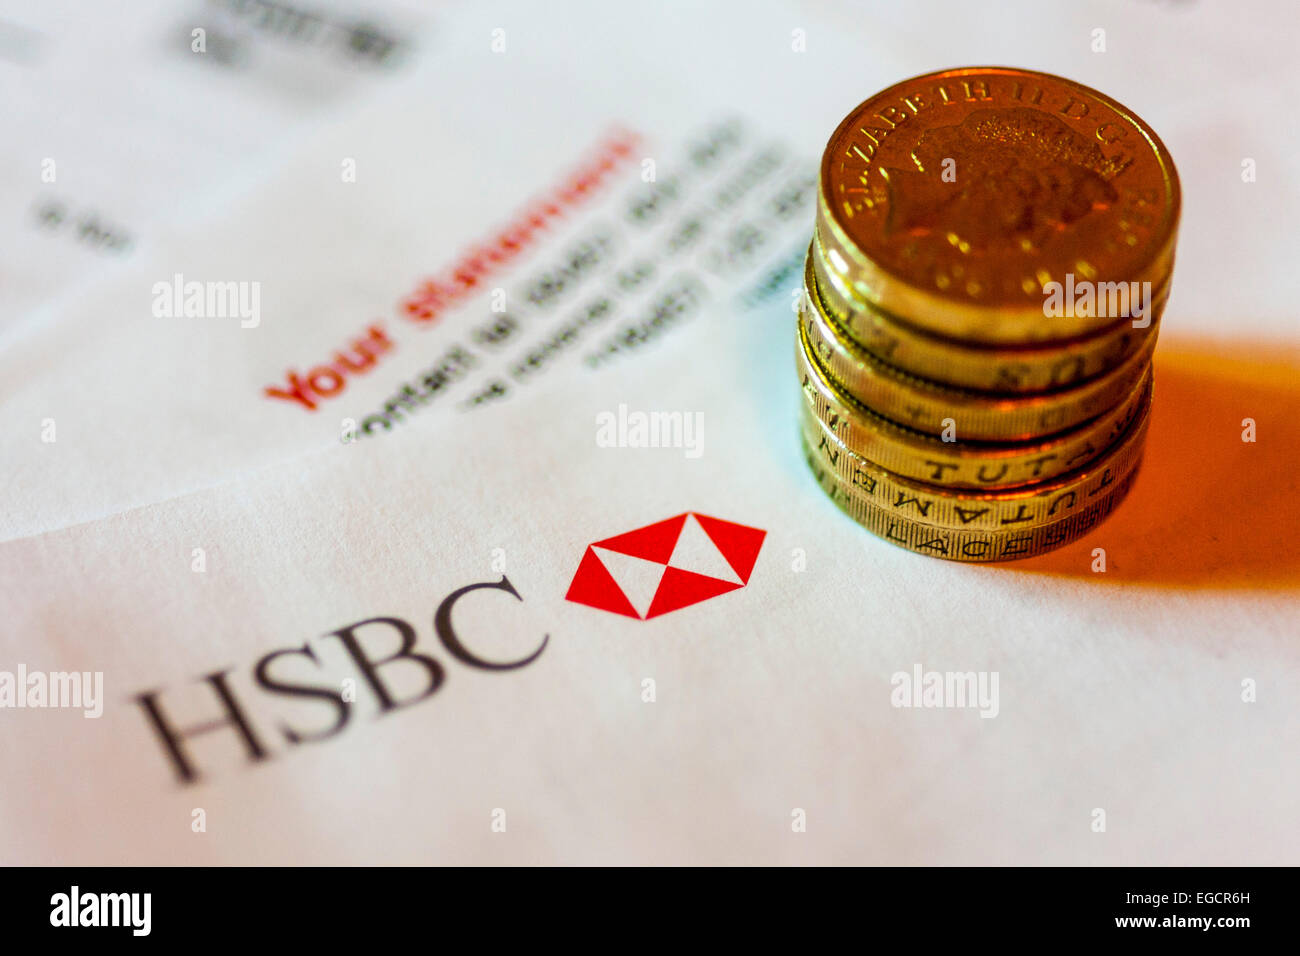 HSBC today issued their annual results citing a fall in profits of 17%. The company still racked up a surplus of 18.7 billion US dollars (£12.1 billion) for 2014 but this was short of City expectations and led to a 3% slide in HSBC's share price in early trading Stock Photo